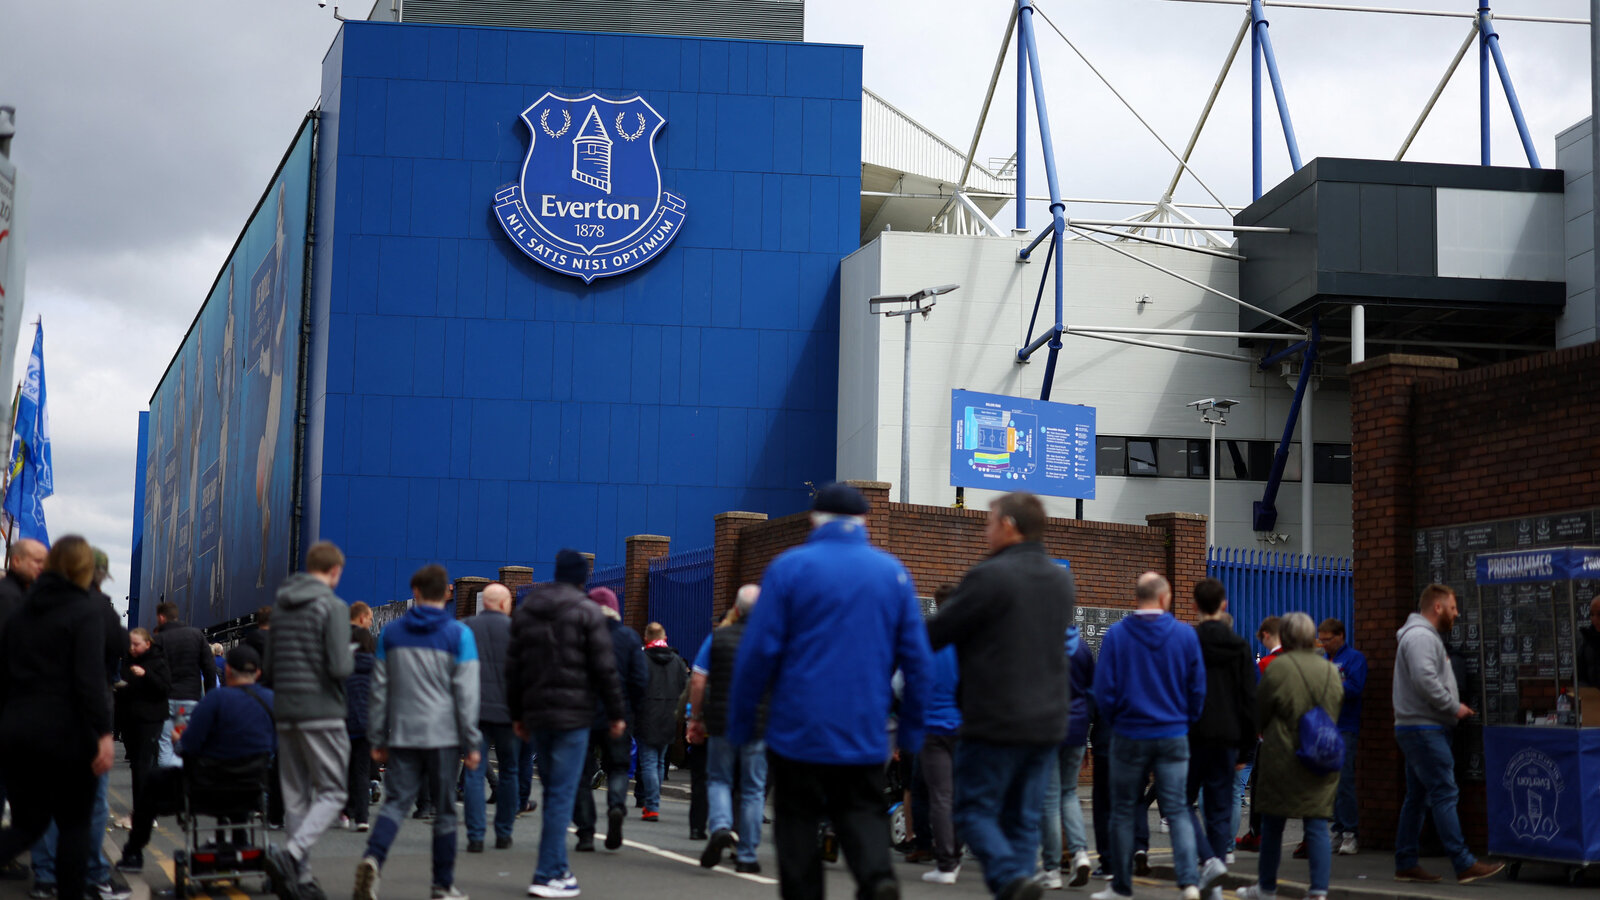 World's tenth richest man tipped to buy Everton